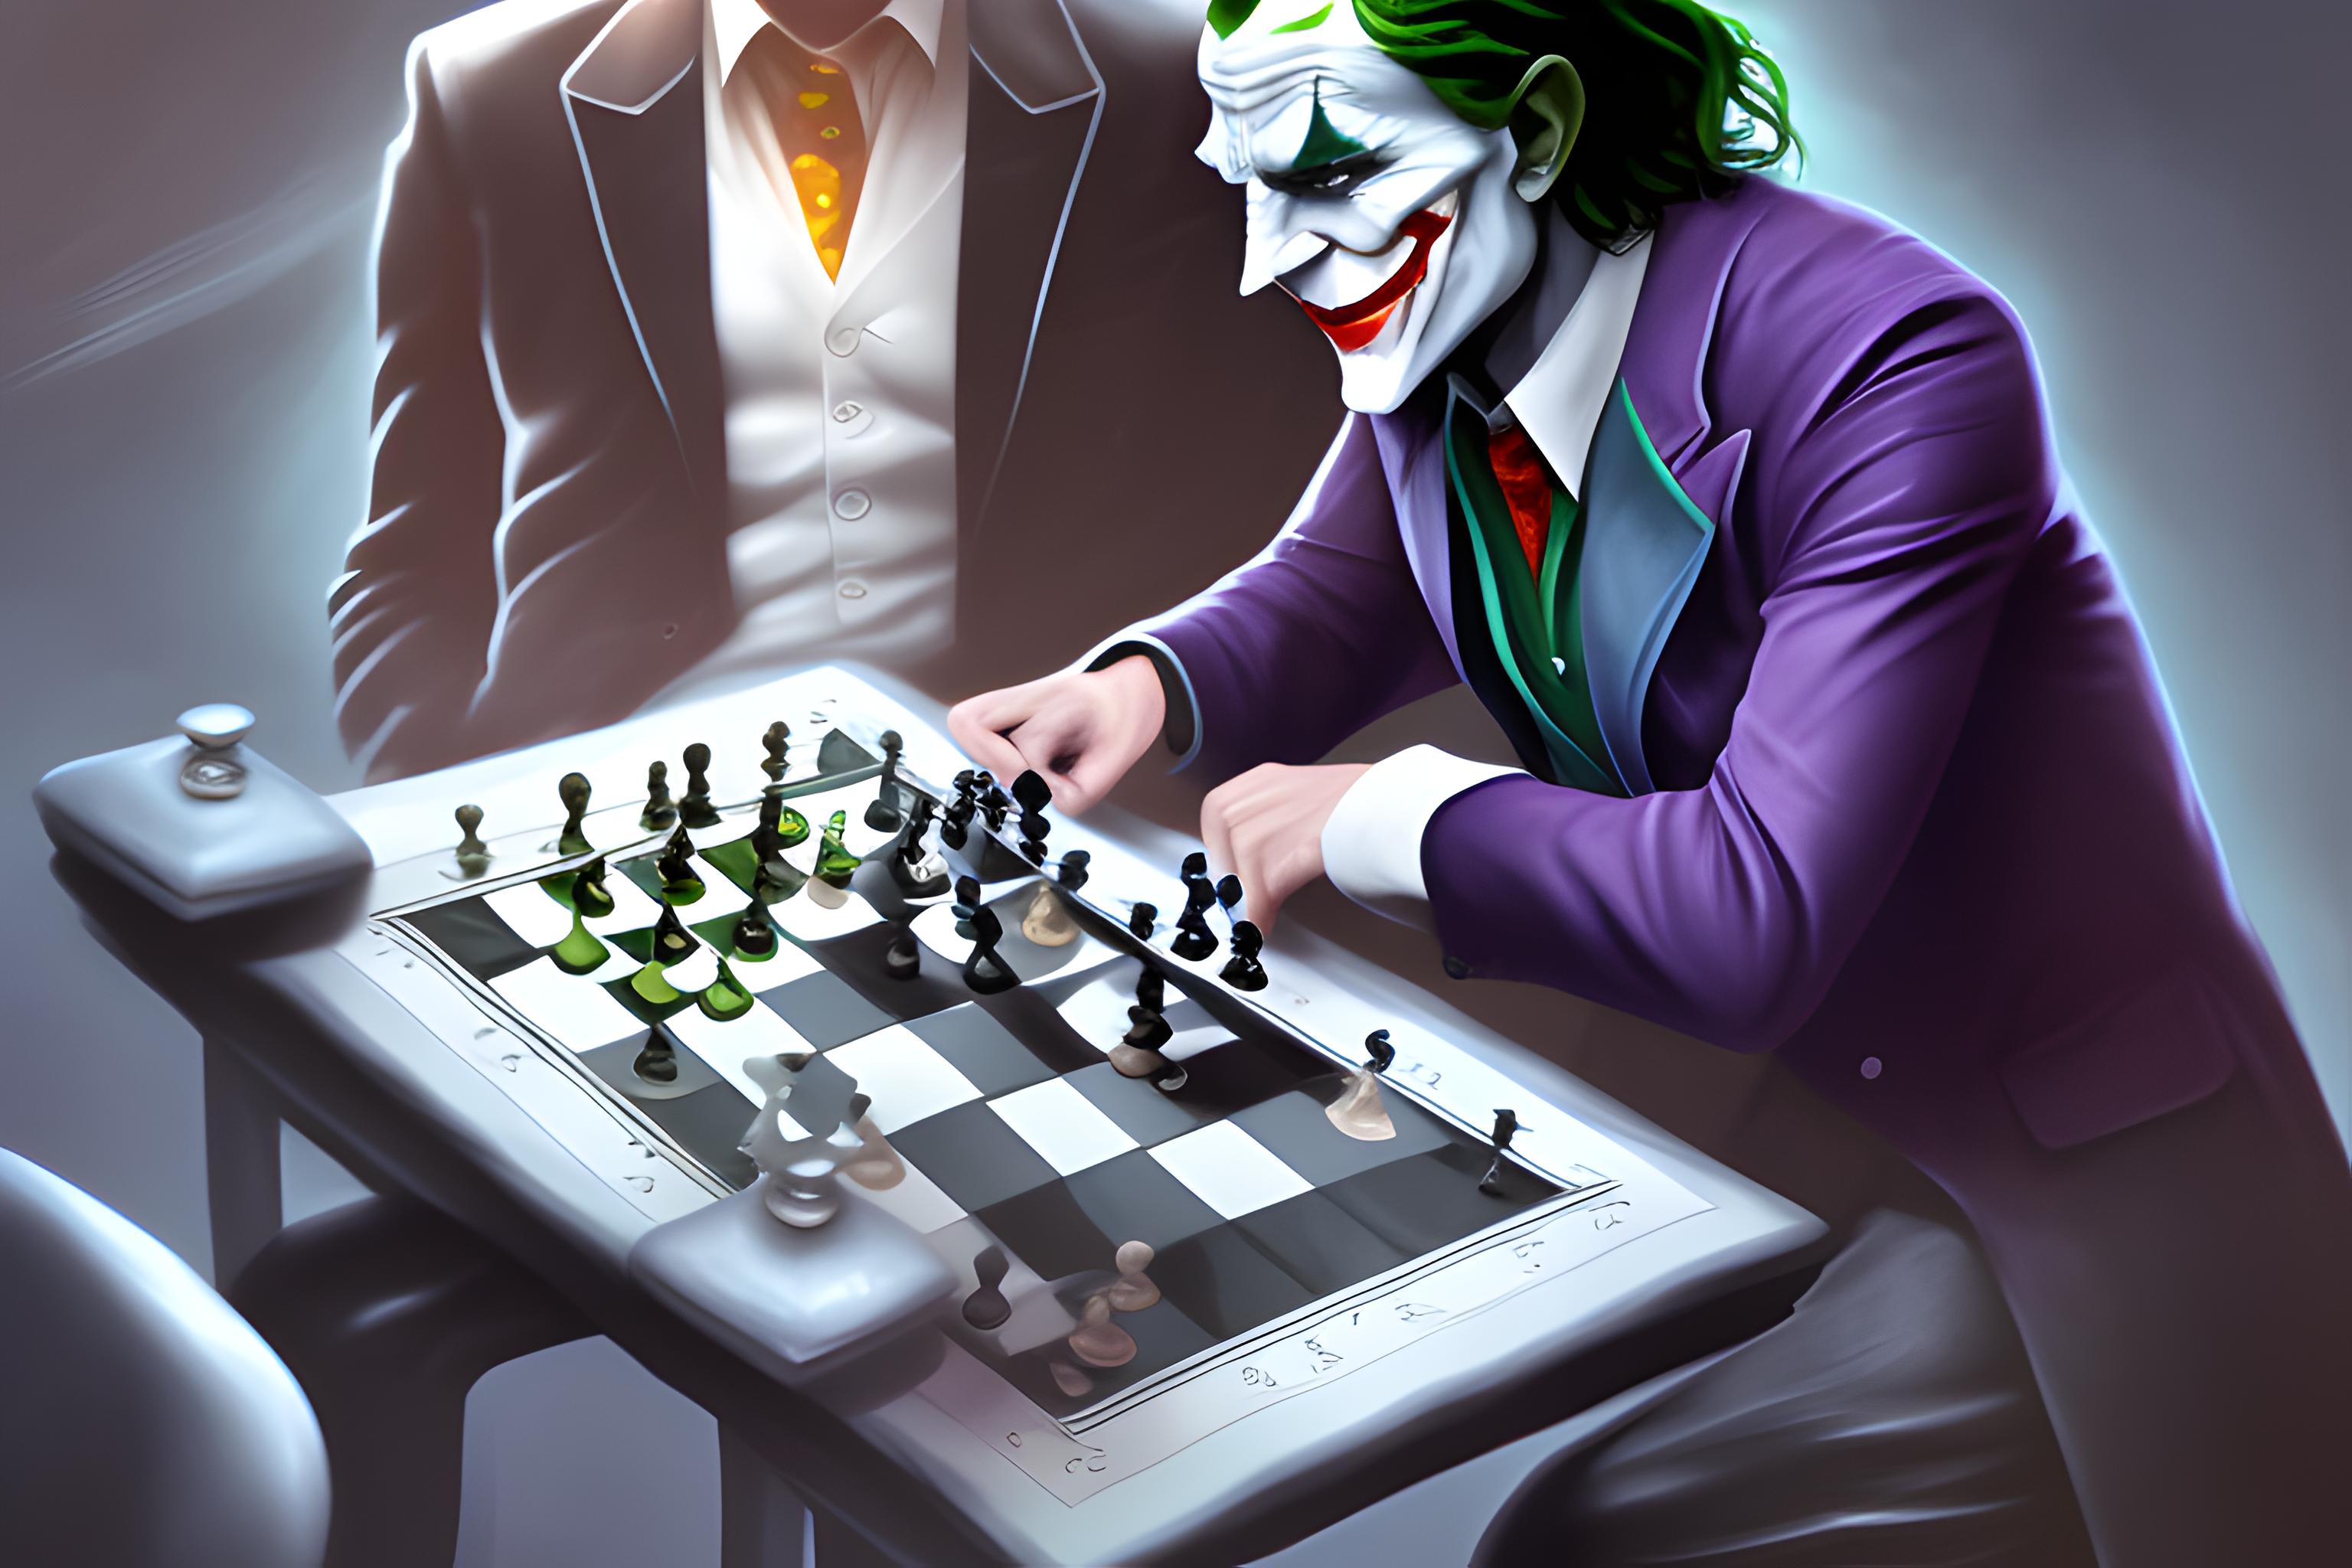 The joker playing chess with batman